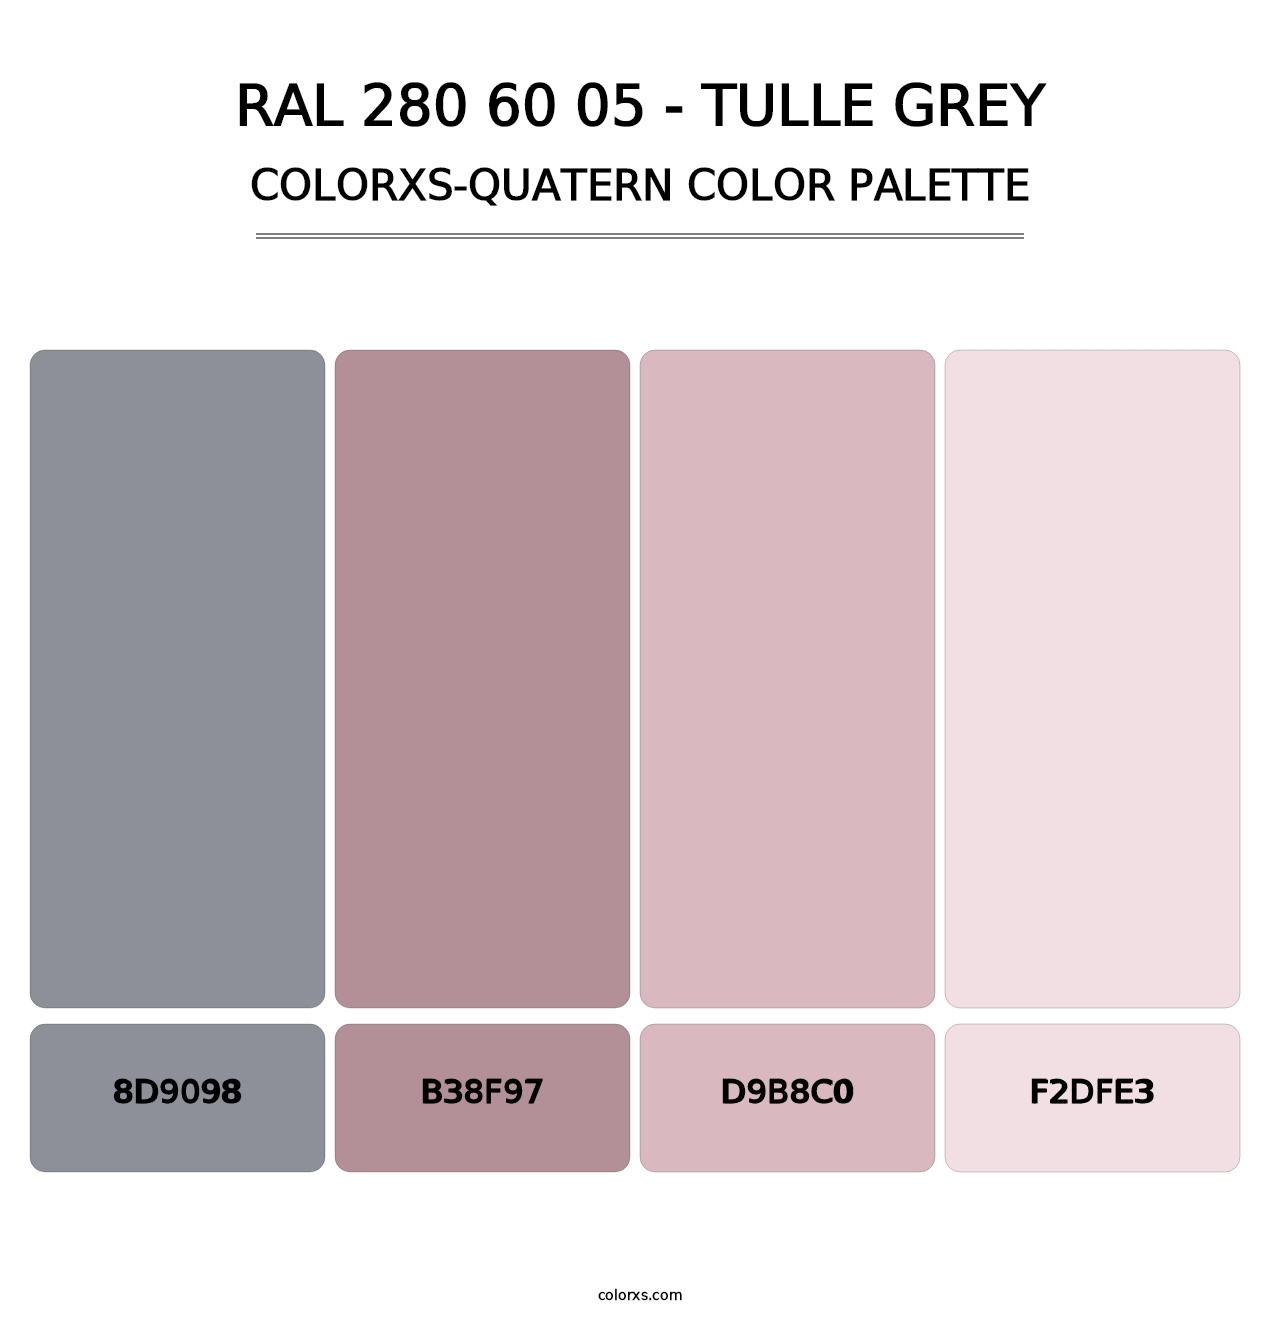 RAL 280 60 05 - Tulle Grey - Colorxs Quatern Palette